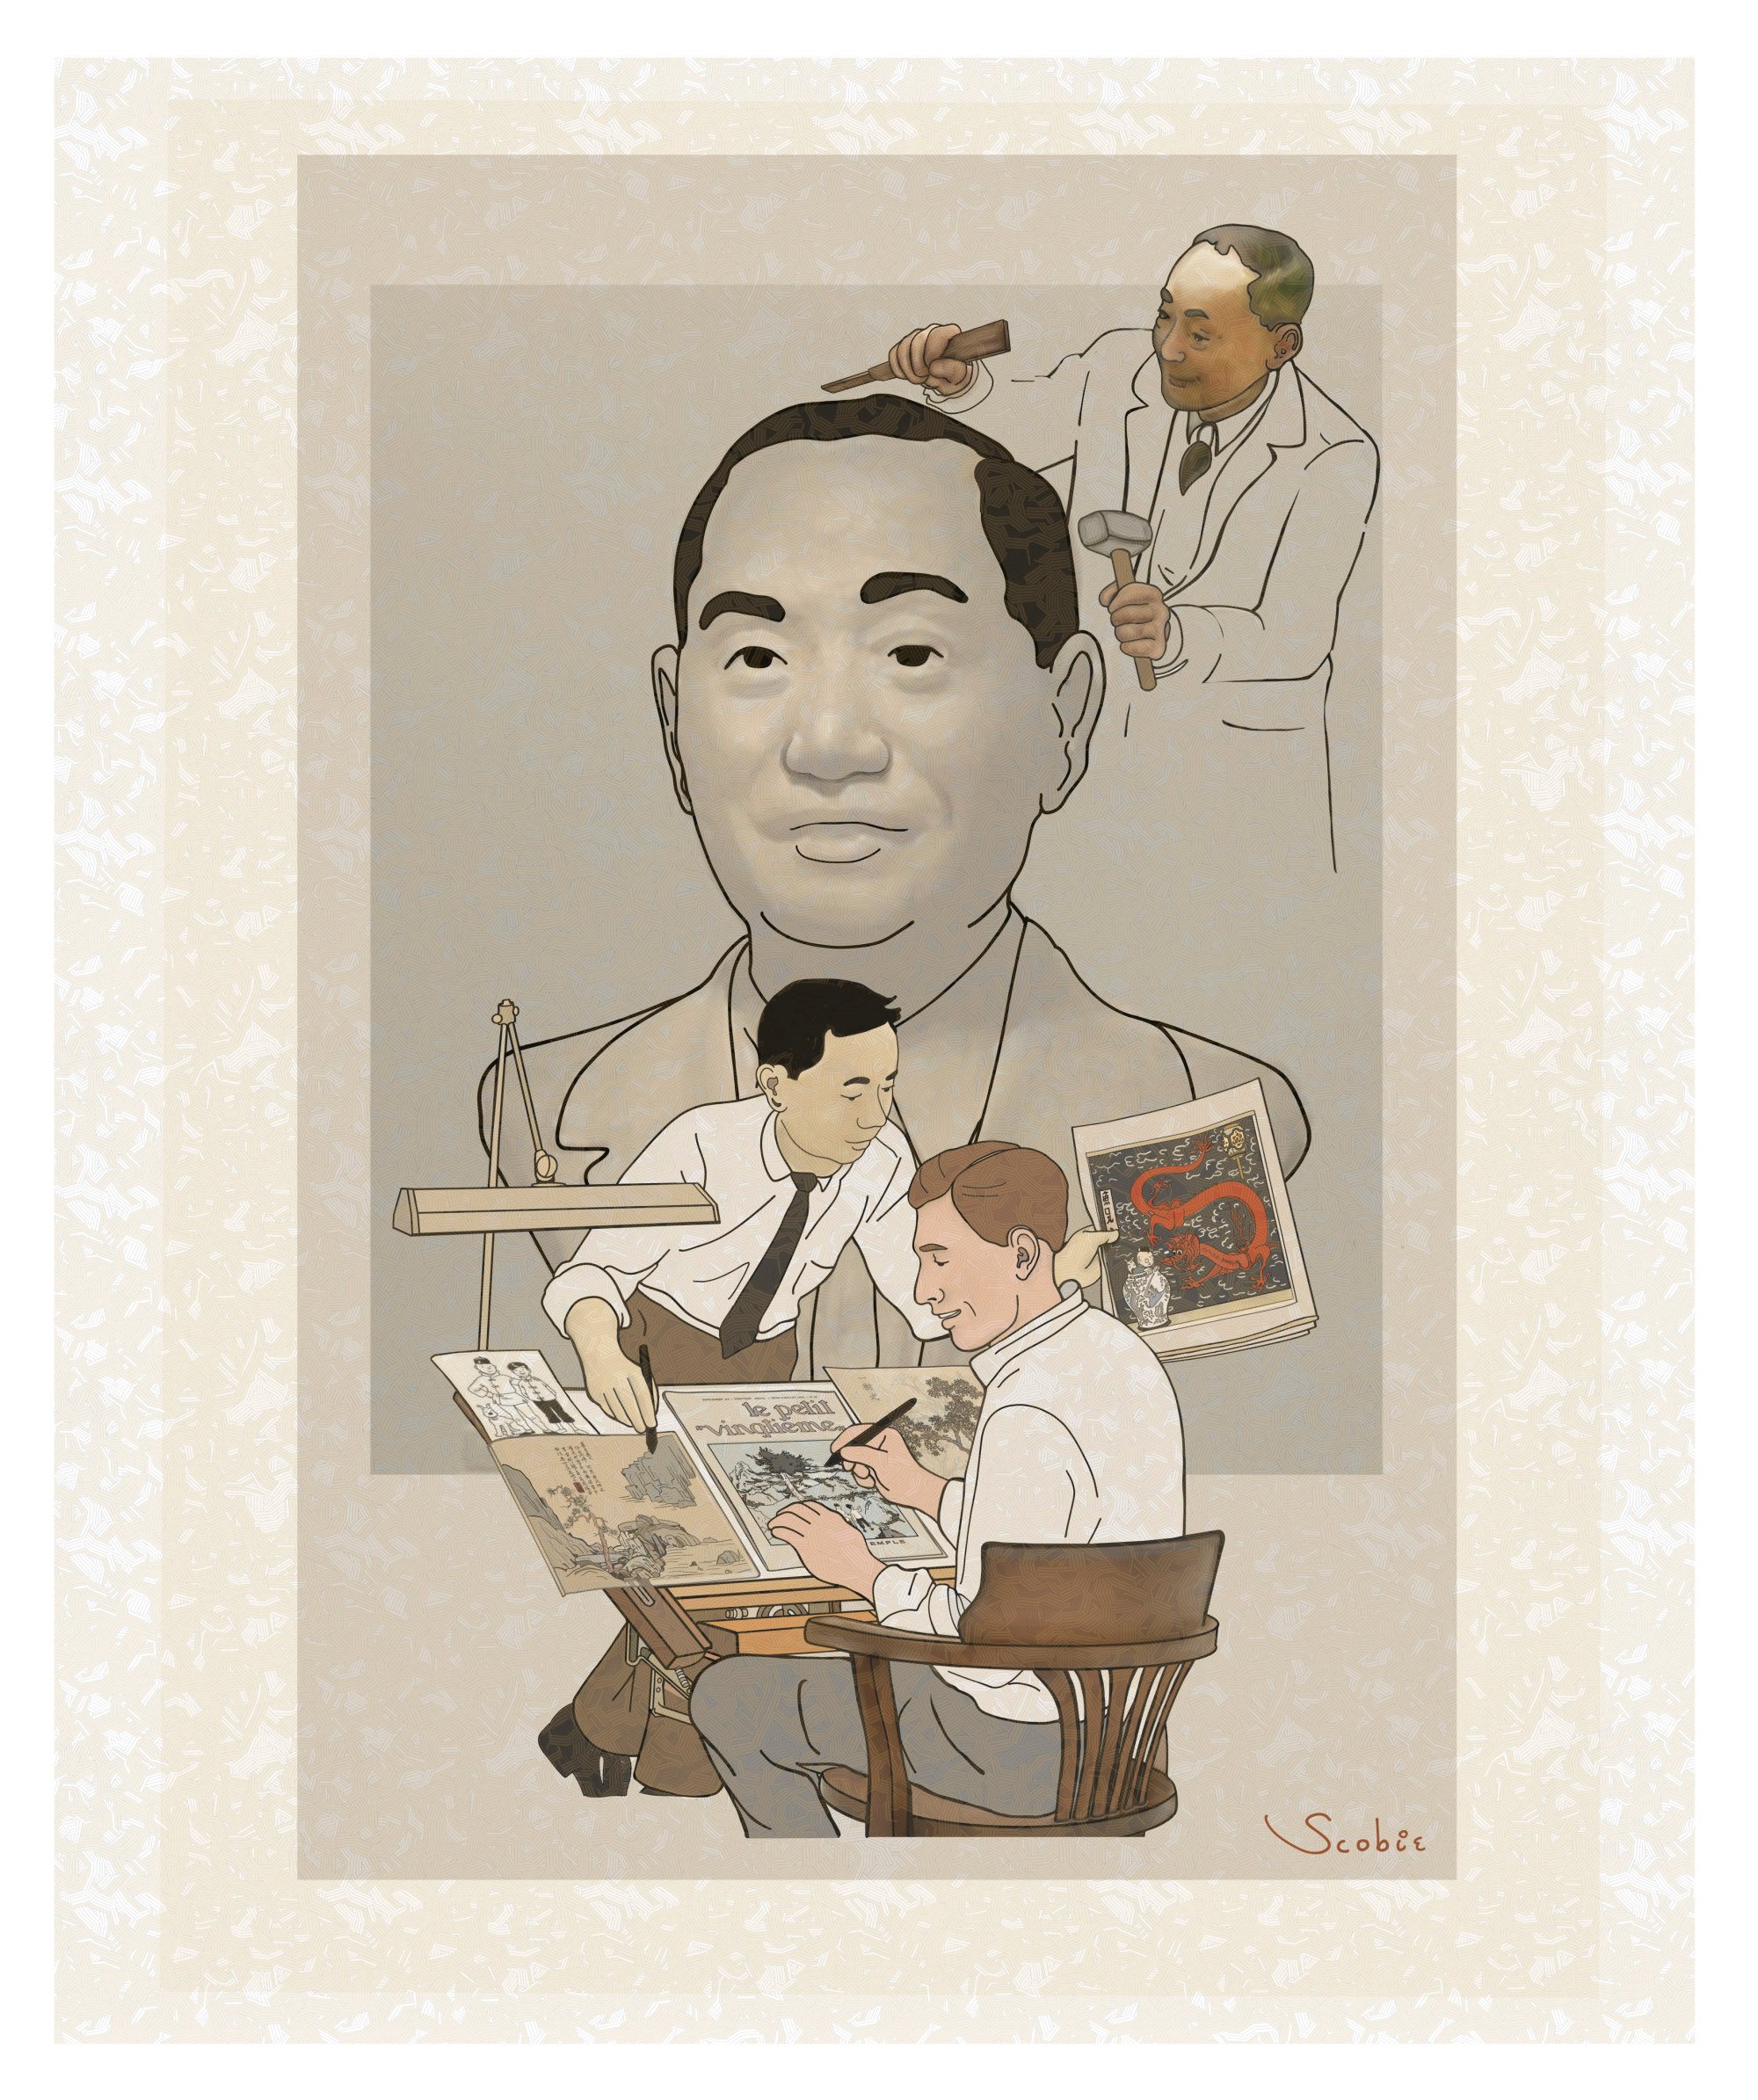 The three ages of Zhang: a) young man working with Hergé, b) middle aged, c) elderly Zhang, and d) their avatars Tintin and Chang on the desk. Illustration: Samuel Porteous